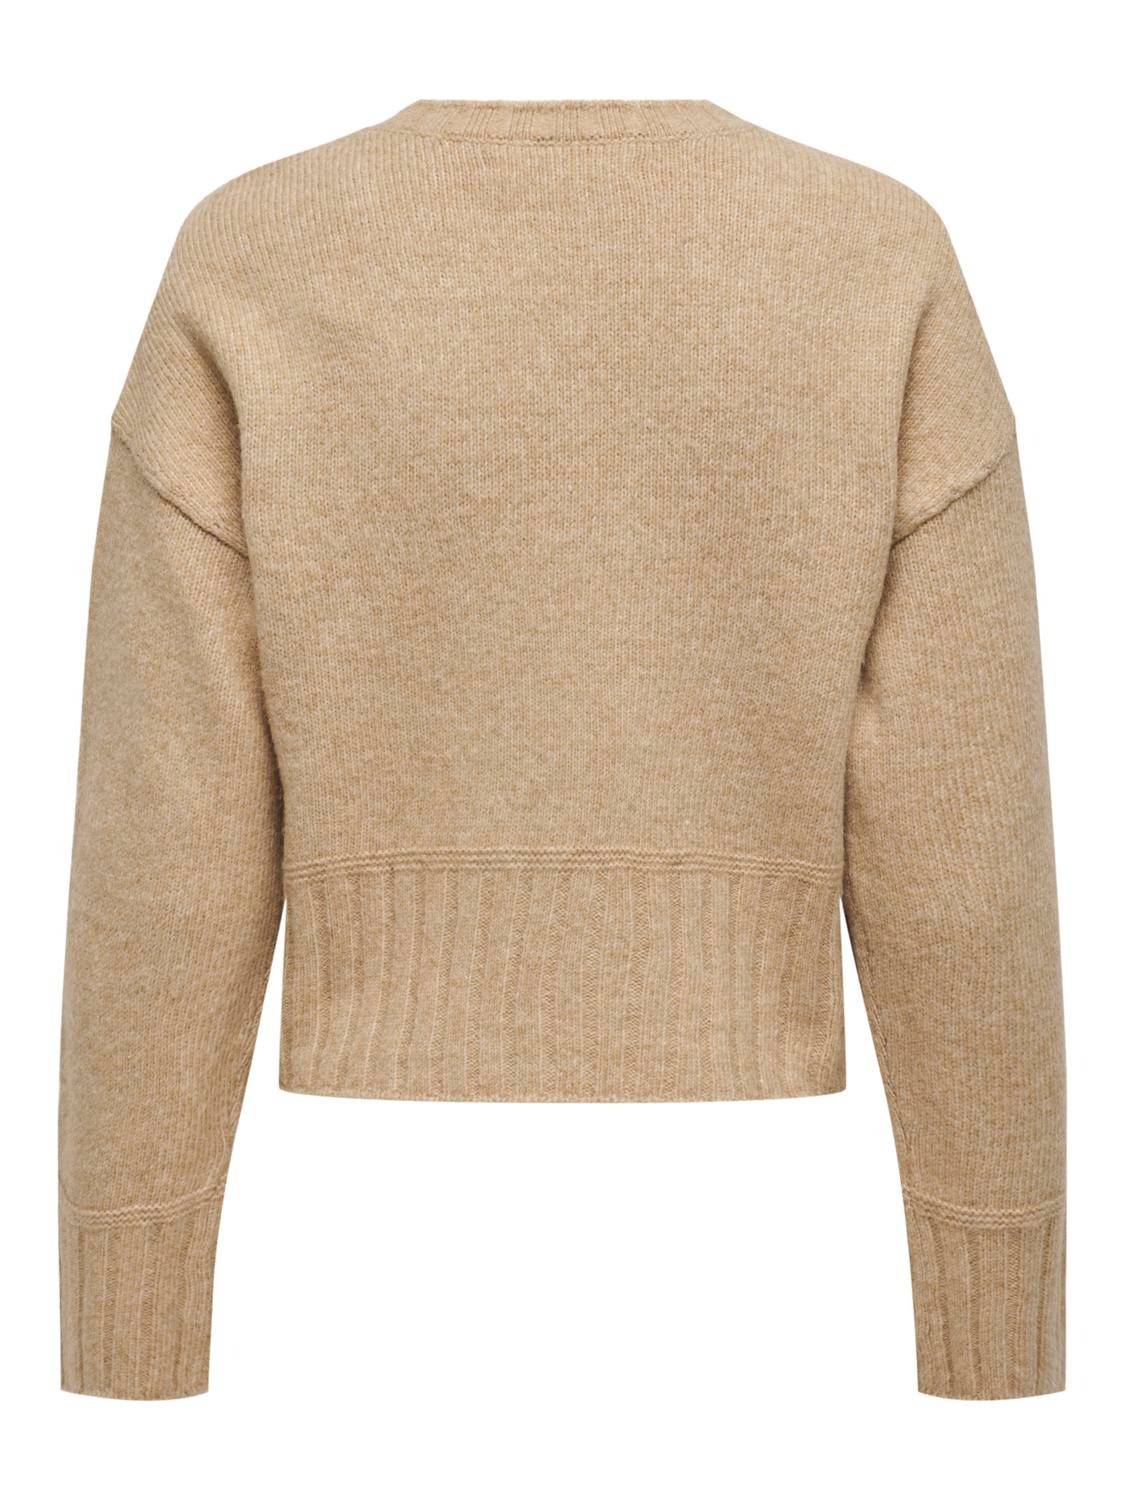 ONLY O-neck knitted pullover -Irish Cream - 15294484